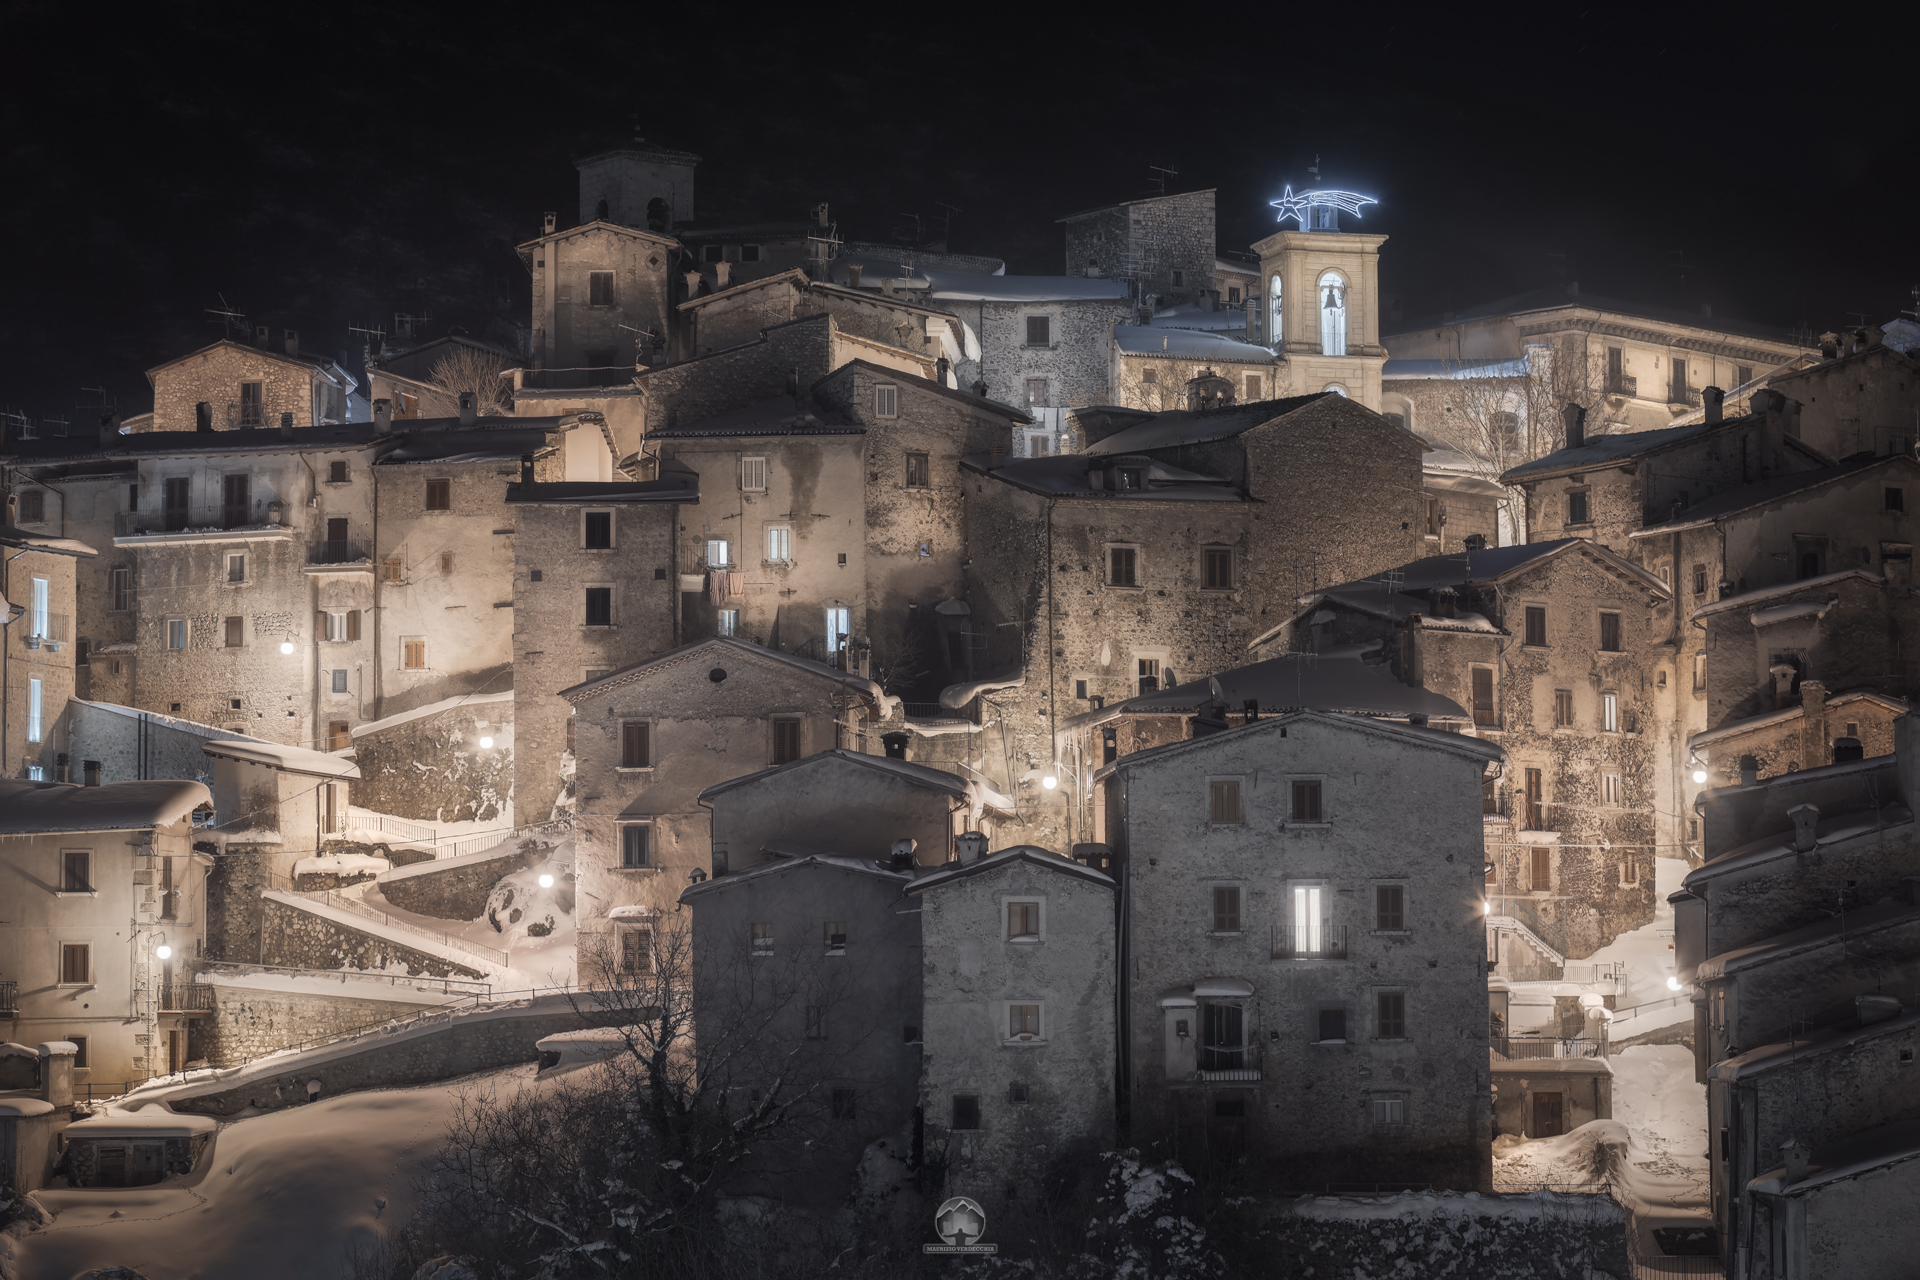 Winter in Scanno ...